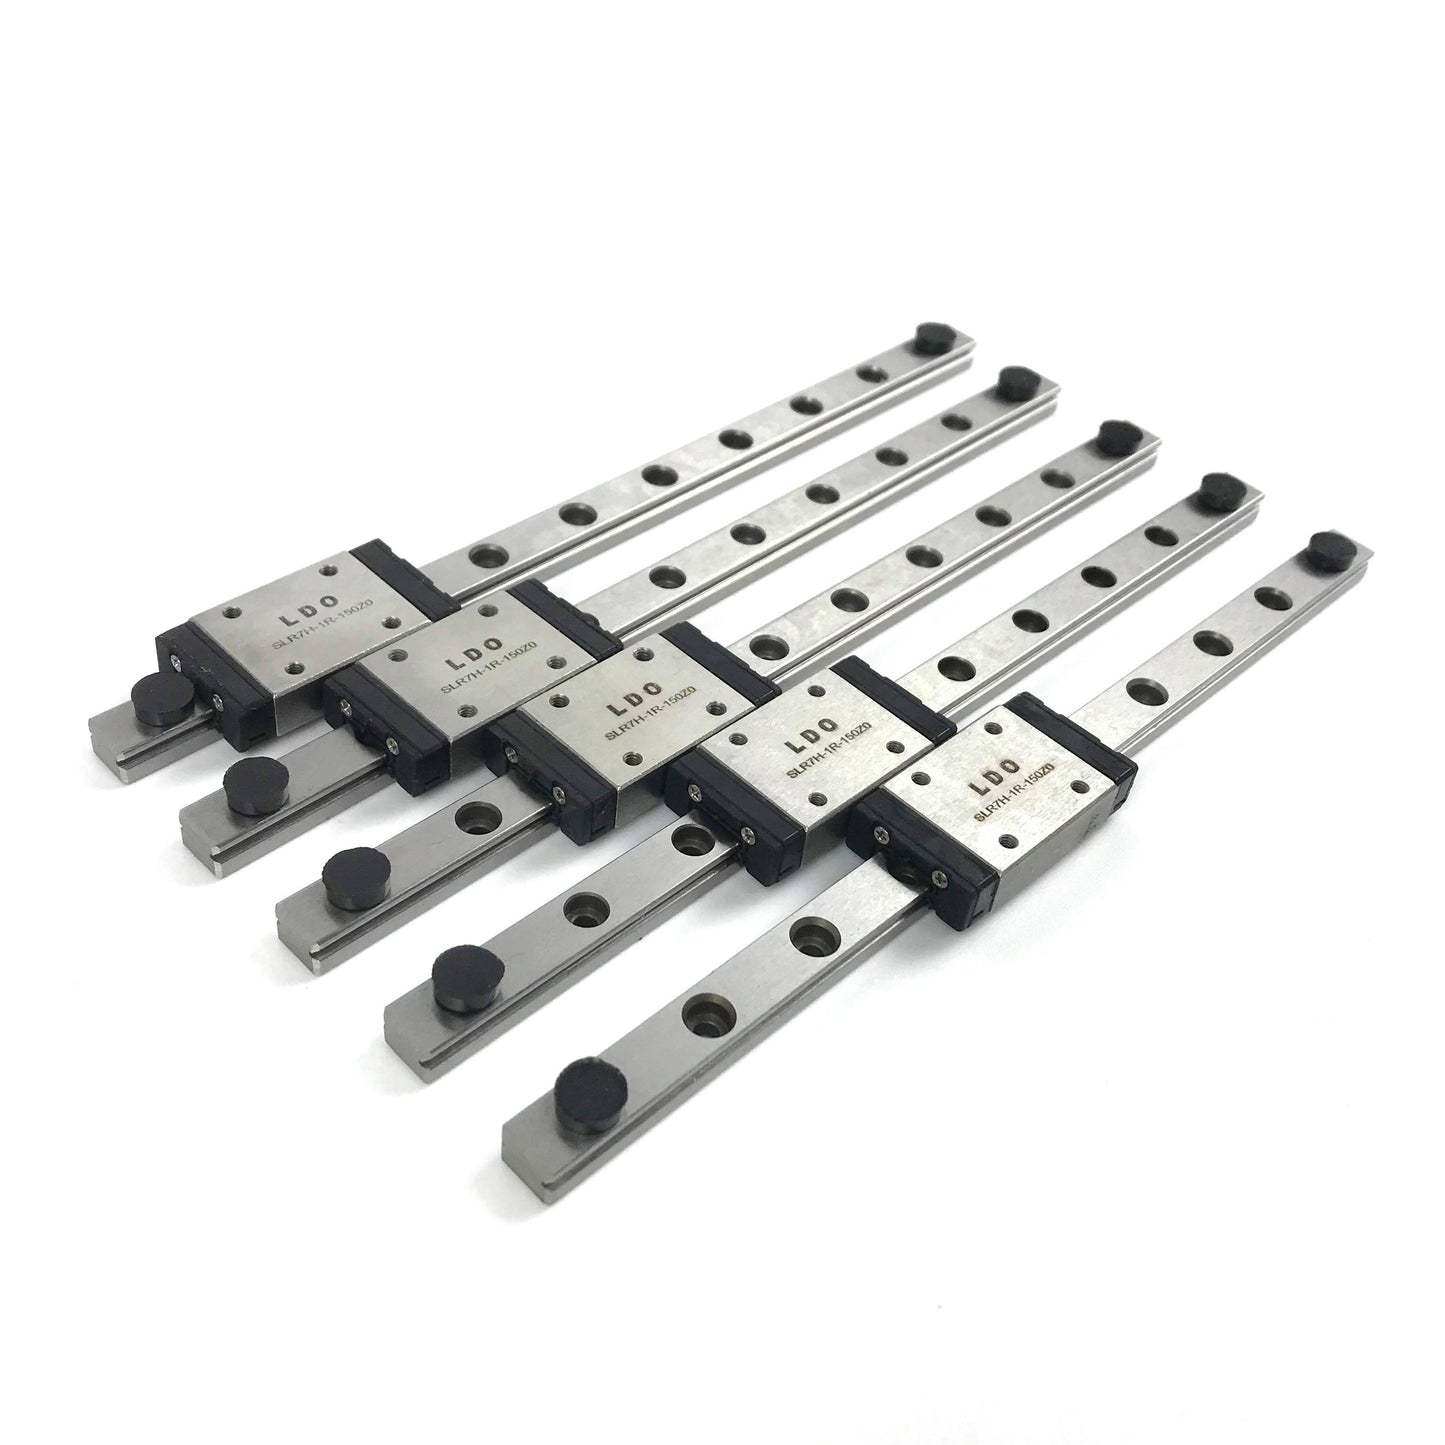 LDO Linear Rail SLR7H Stainless Linear Rail with Carriage (150mm) 5 pack Voron V0 and V0.1